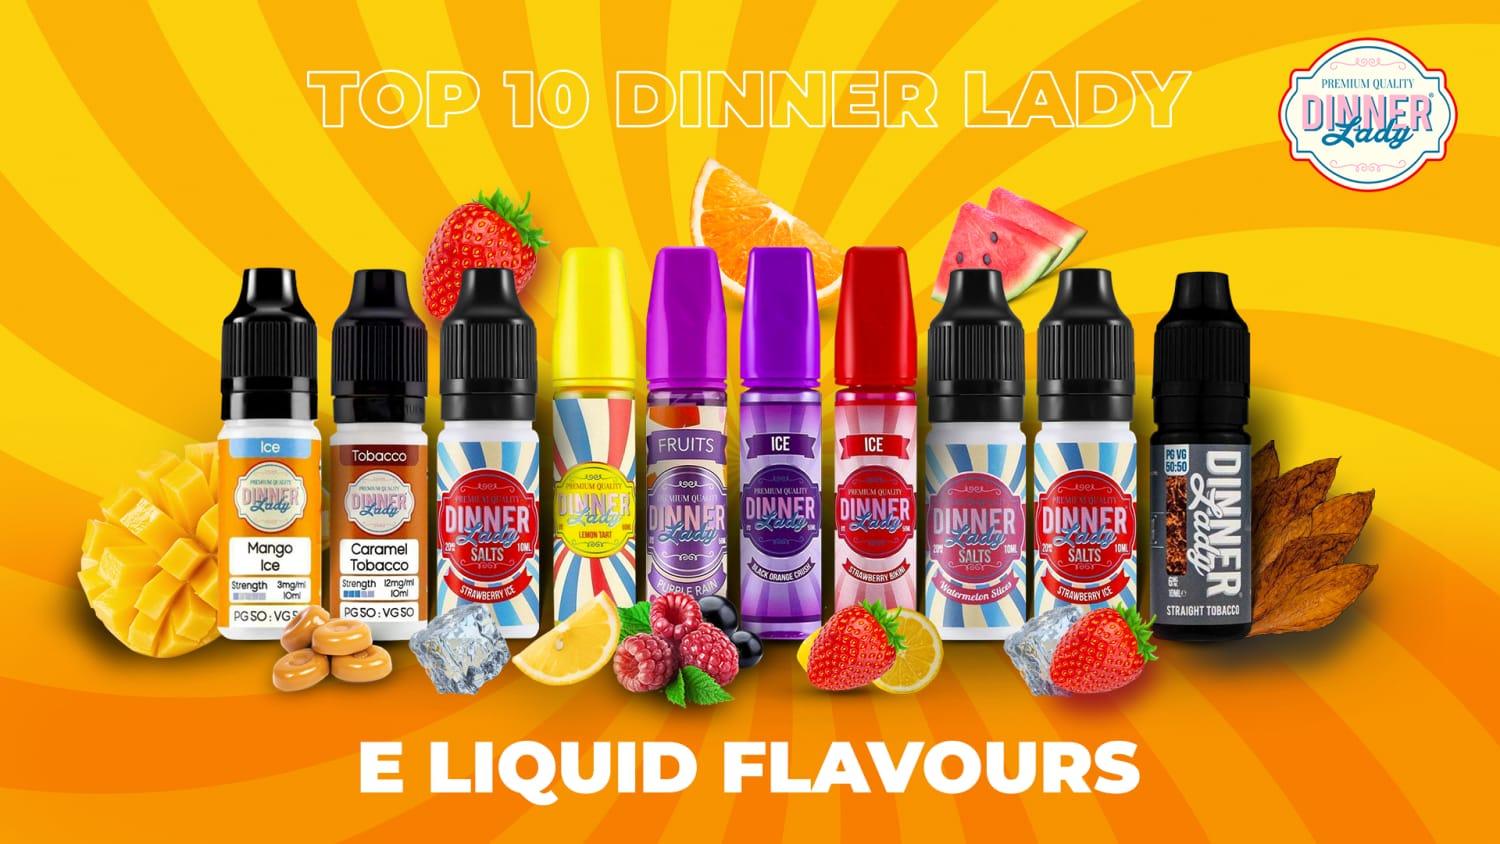 Dinner Lady E-Liquid Top 10 Flavours